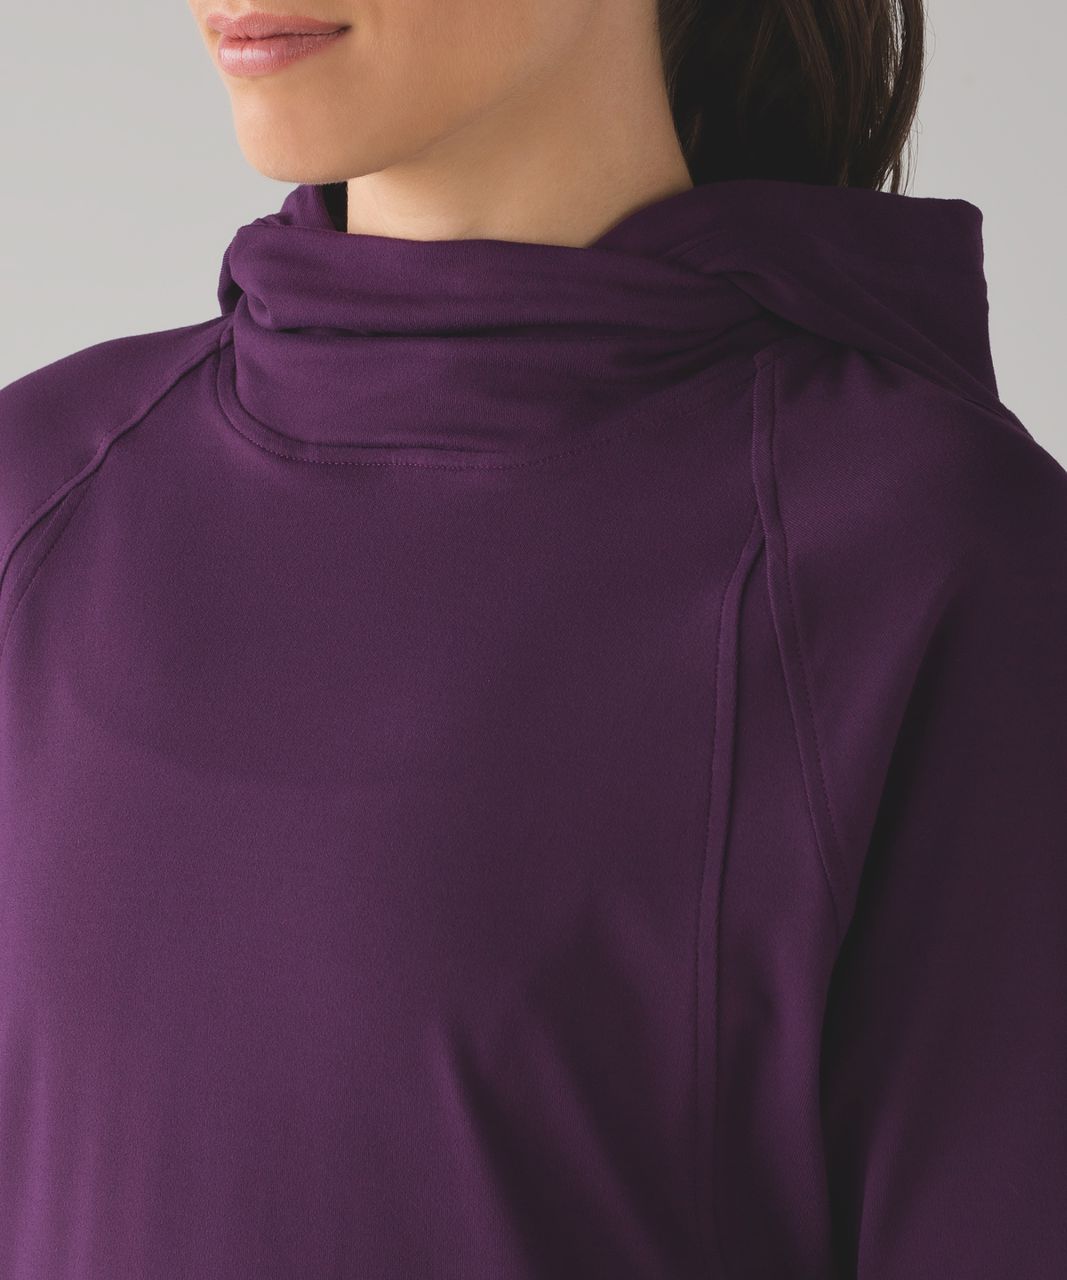 Lululemon Pick Up The Pace Long Sleeve Hoodie Size 10